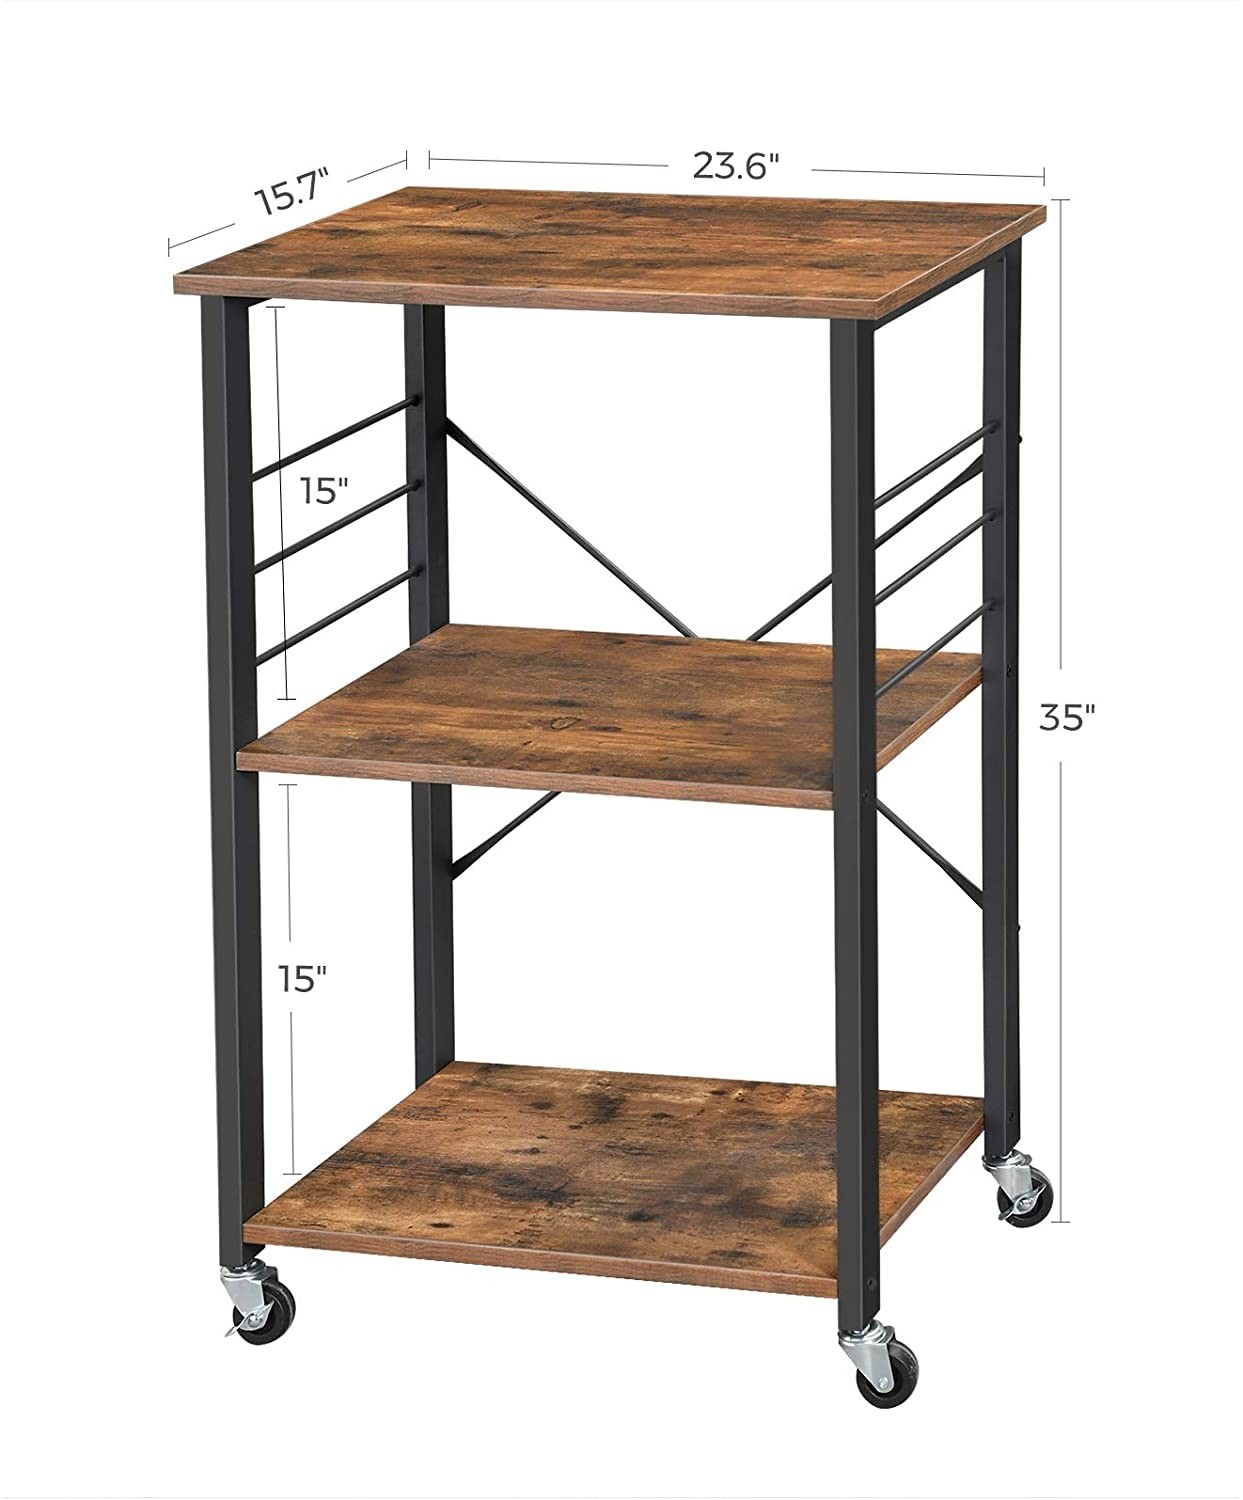 Standing bakers racks microwave oven stand rustic brown 2